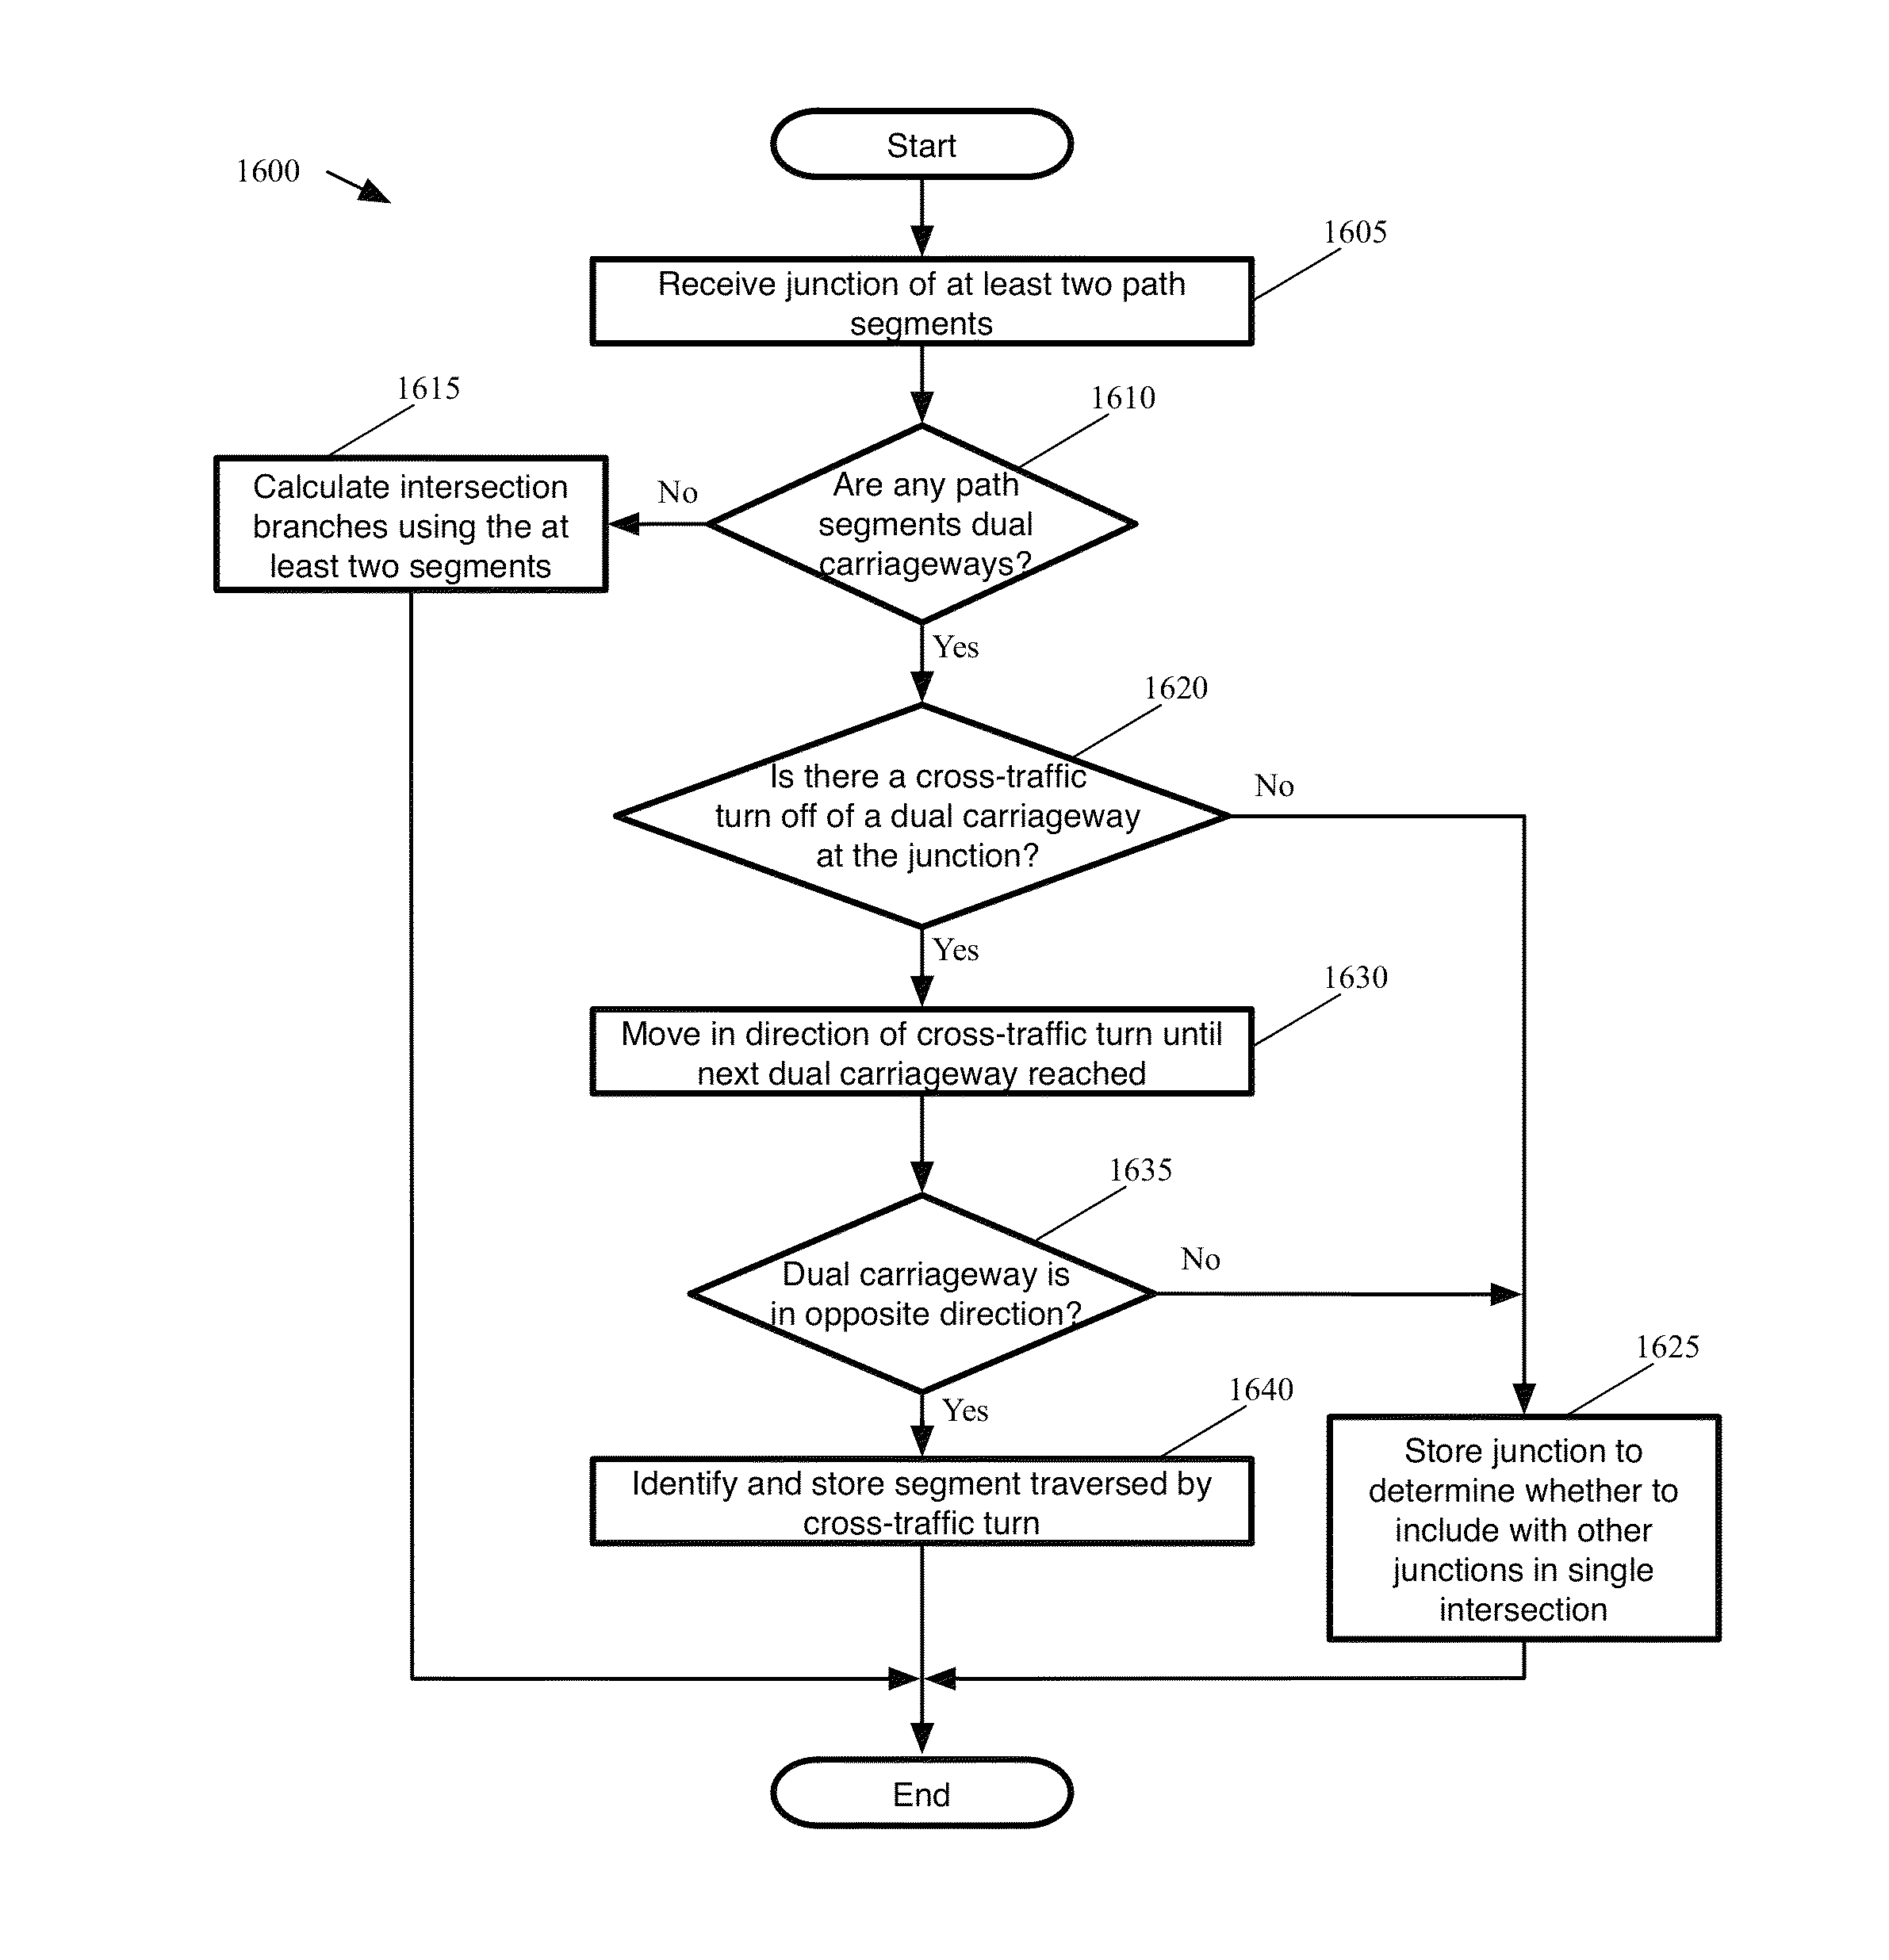 Generation of intersection information by a mapping service